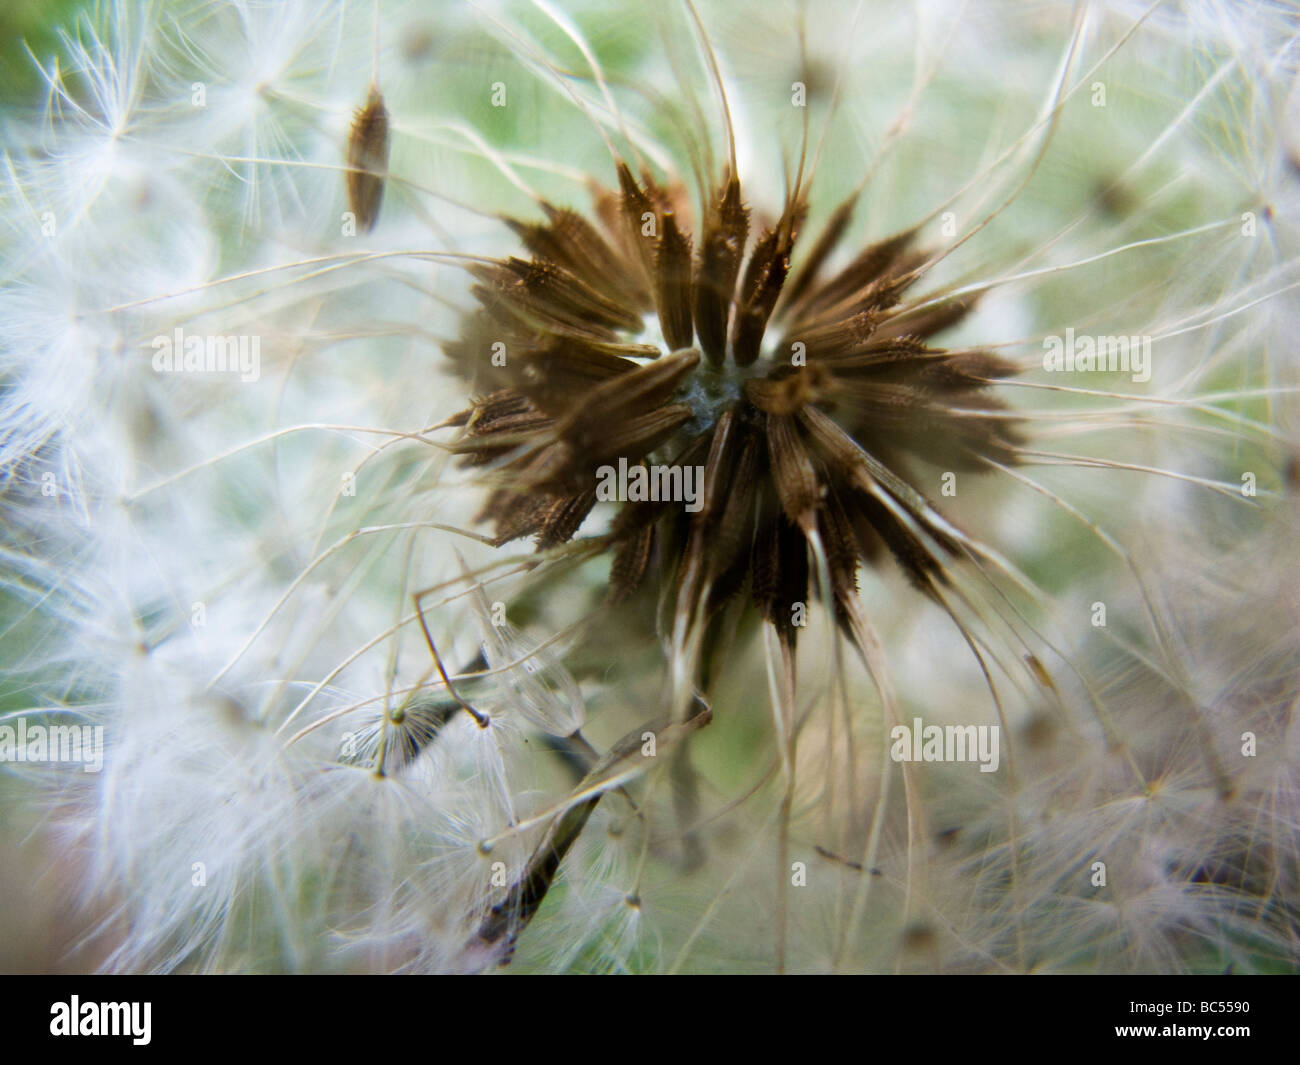 close up image of flower Stock Photo